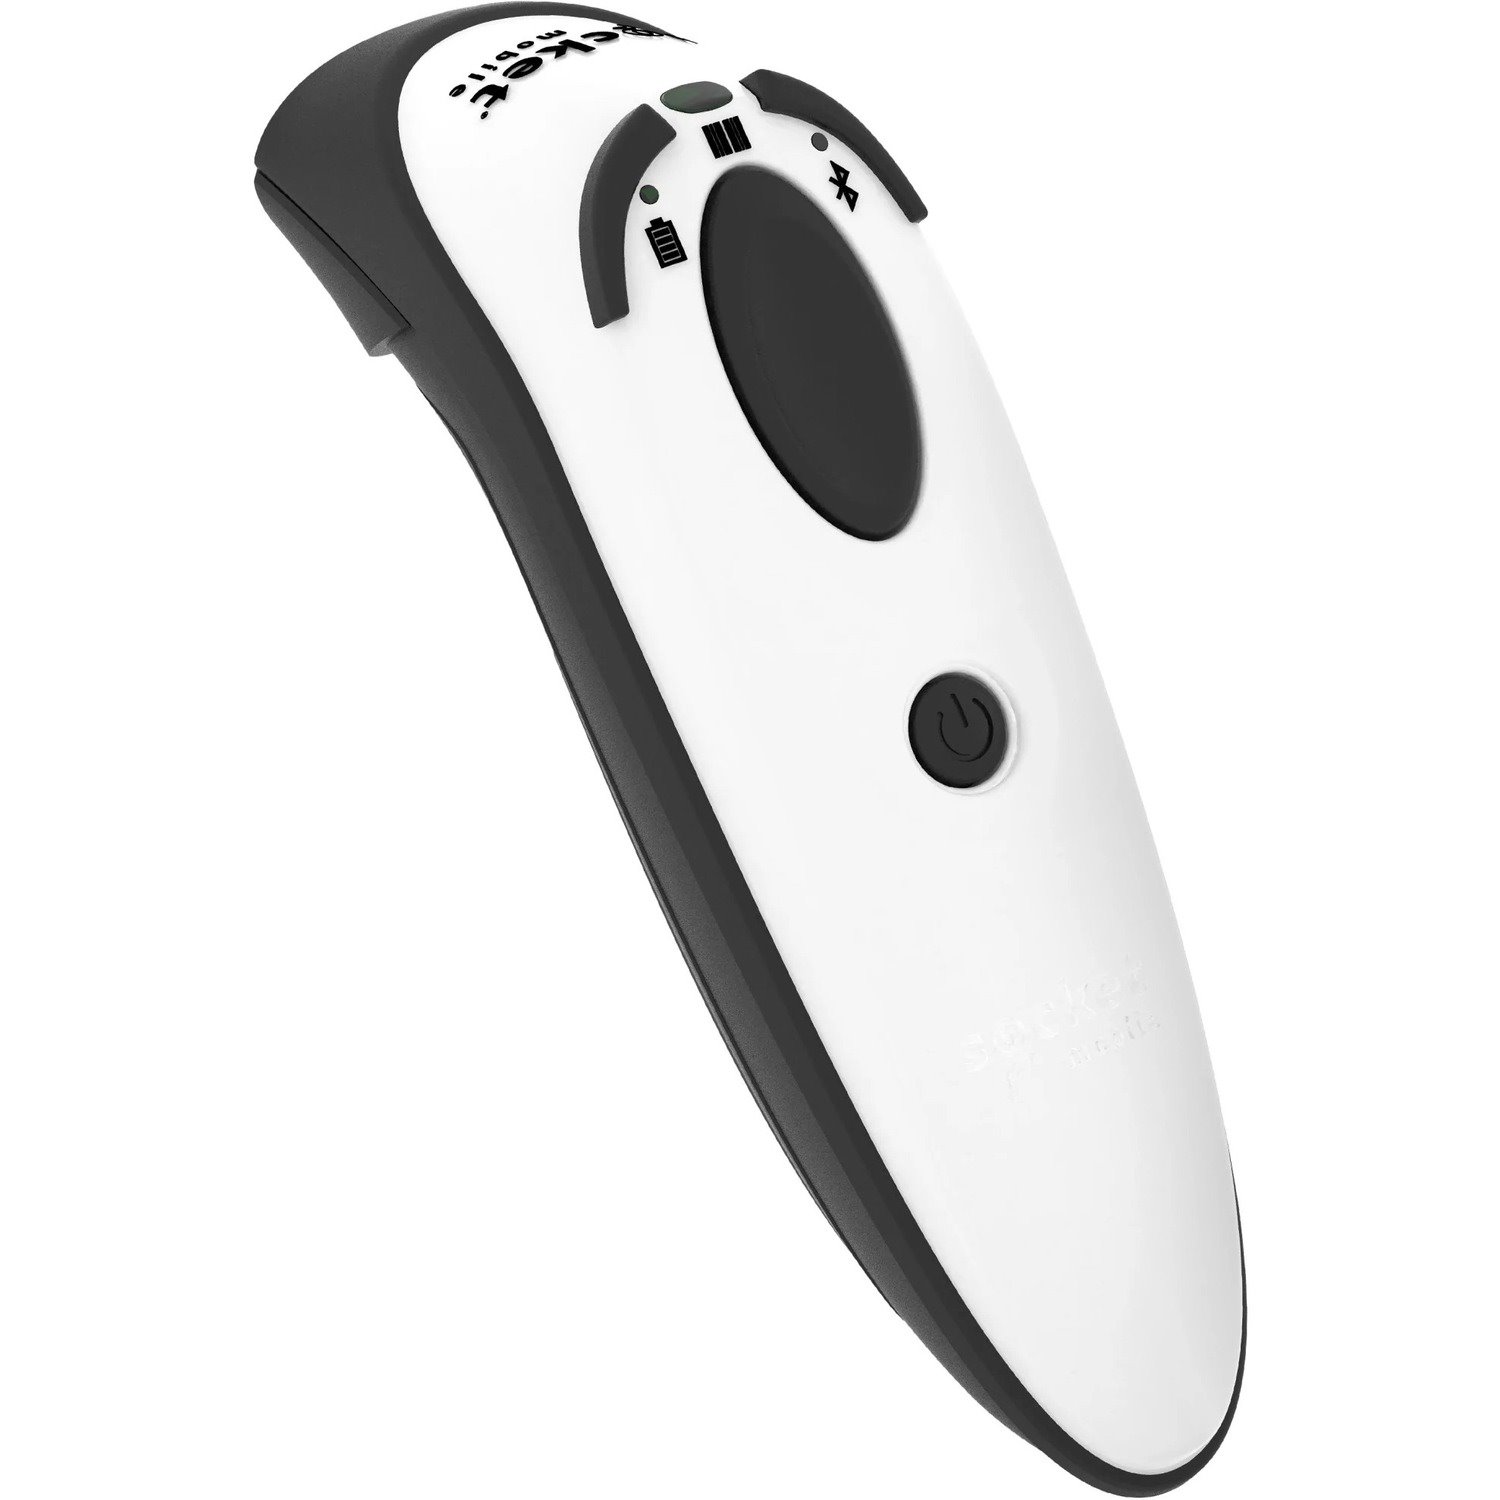 Socket Mobile DuraScan D720 Rugged Retail, Transportation, Warehouse, Manufacturing, Field Sales/Service, Healthcare, Asset Tracking Handheld Barcode Scanner - Wireless Connectivity - White - USB Cable Included